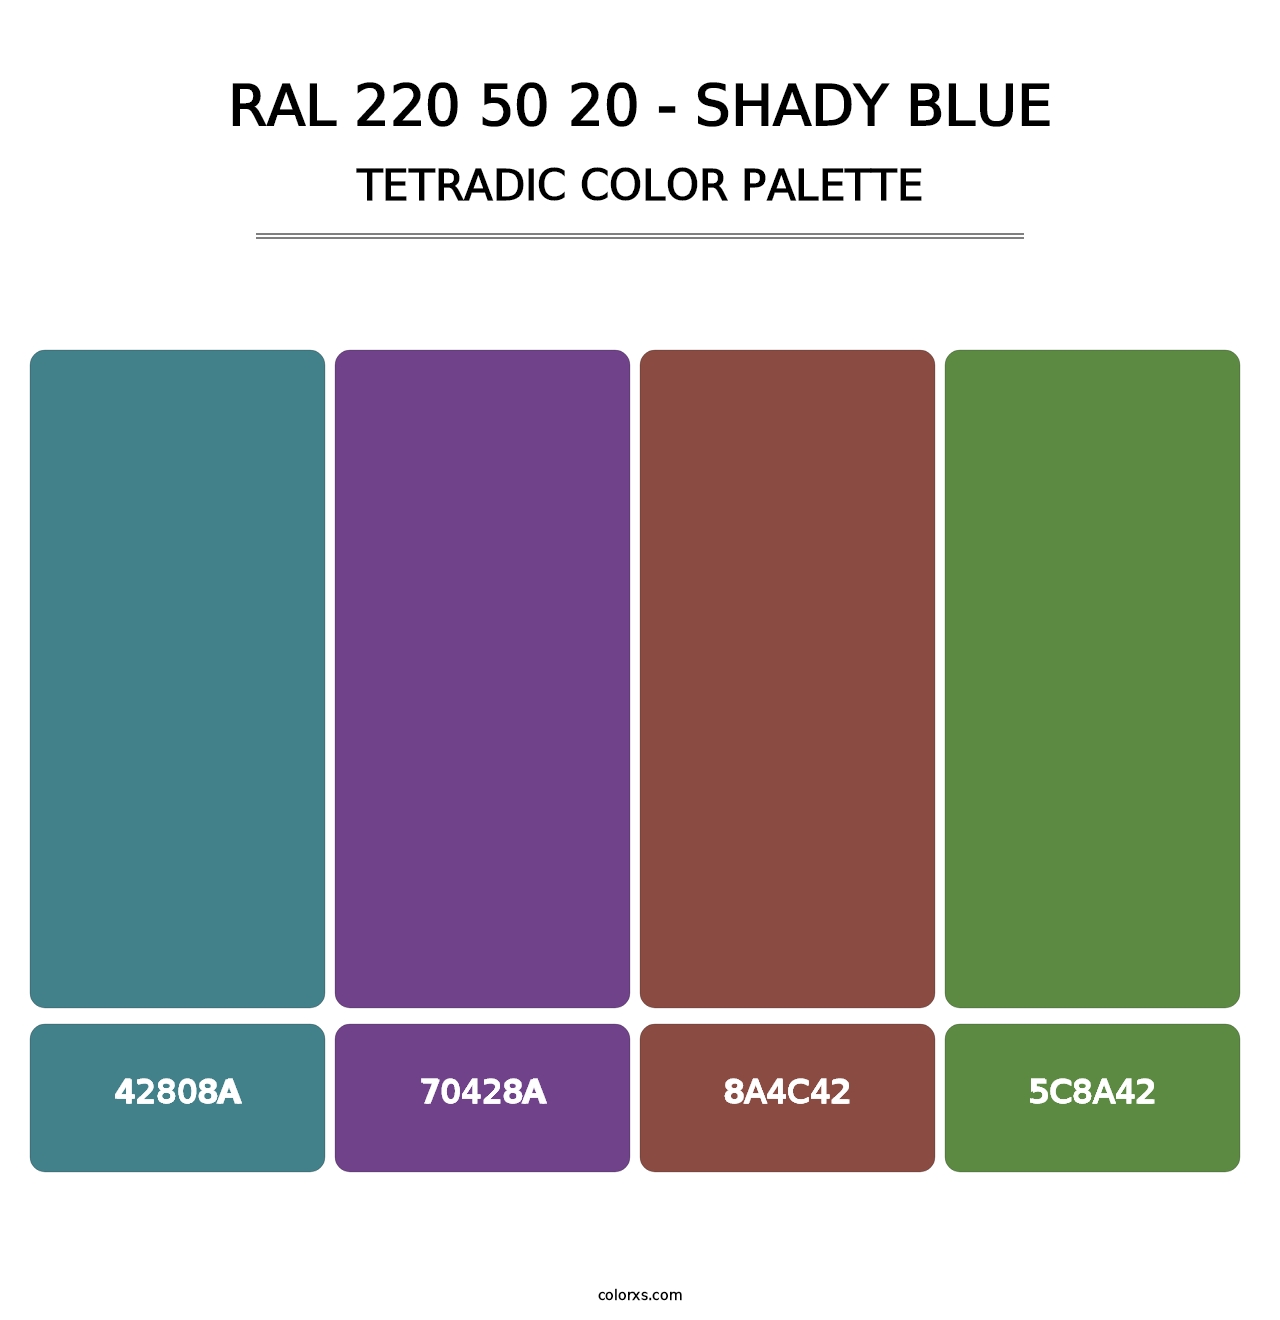 RAL 220 50 20 - Shady Blue - Tetradic Color Palette